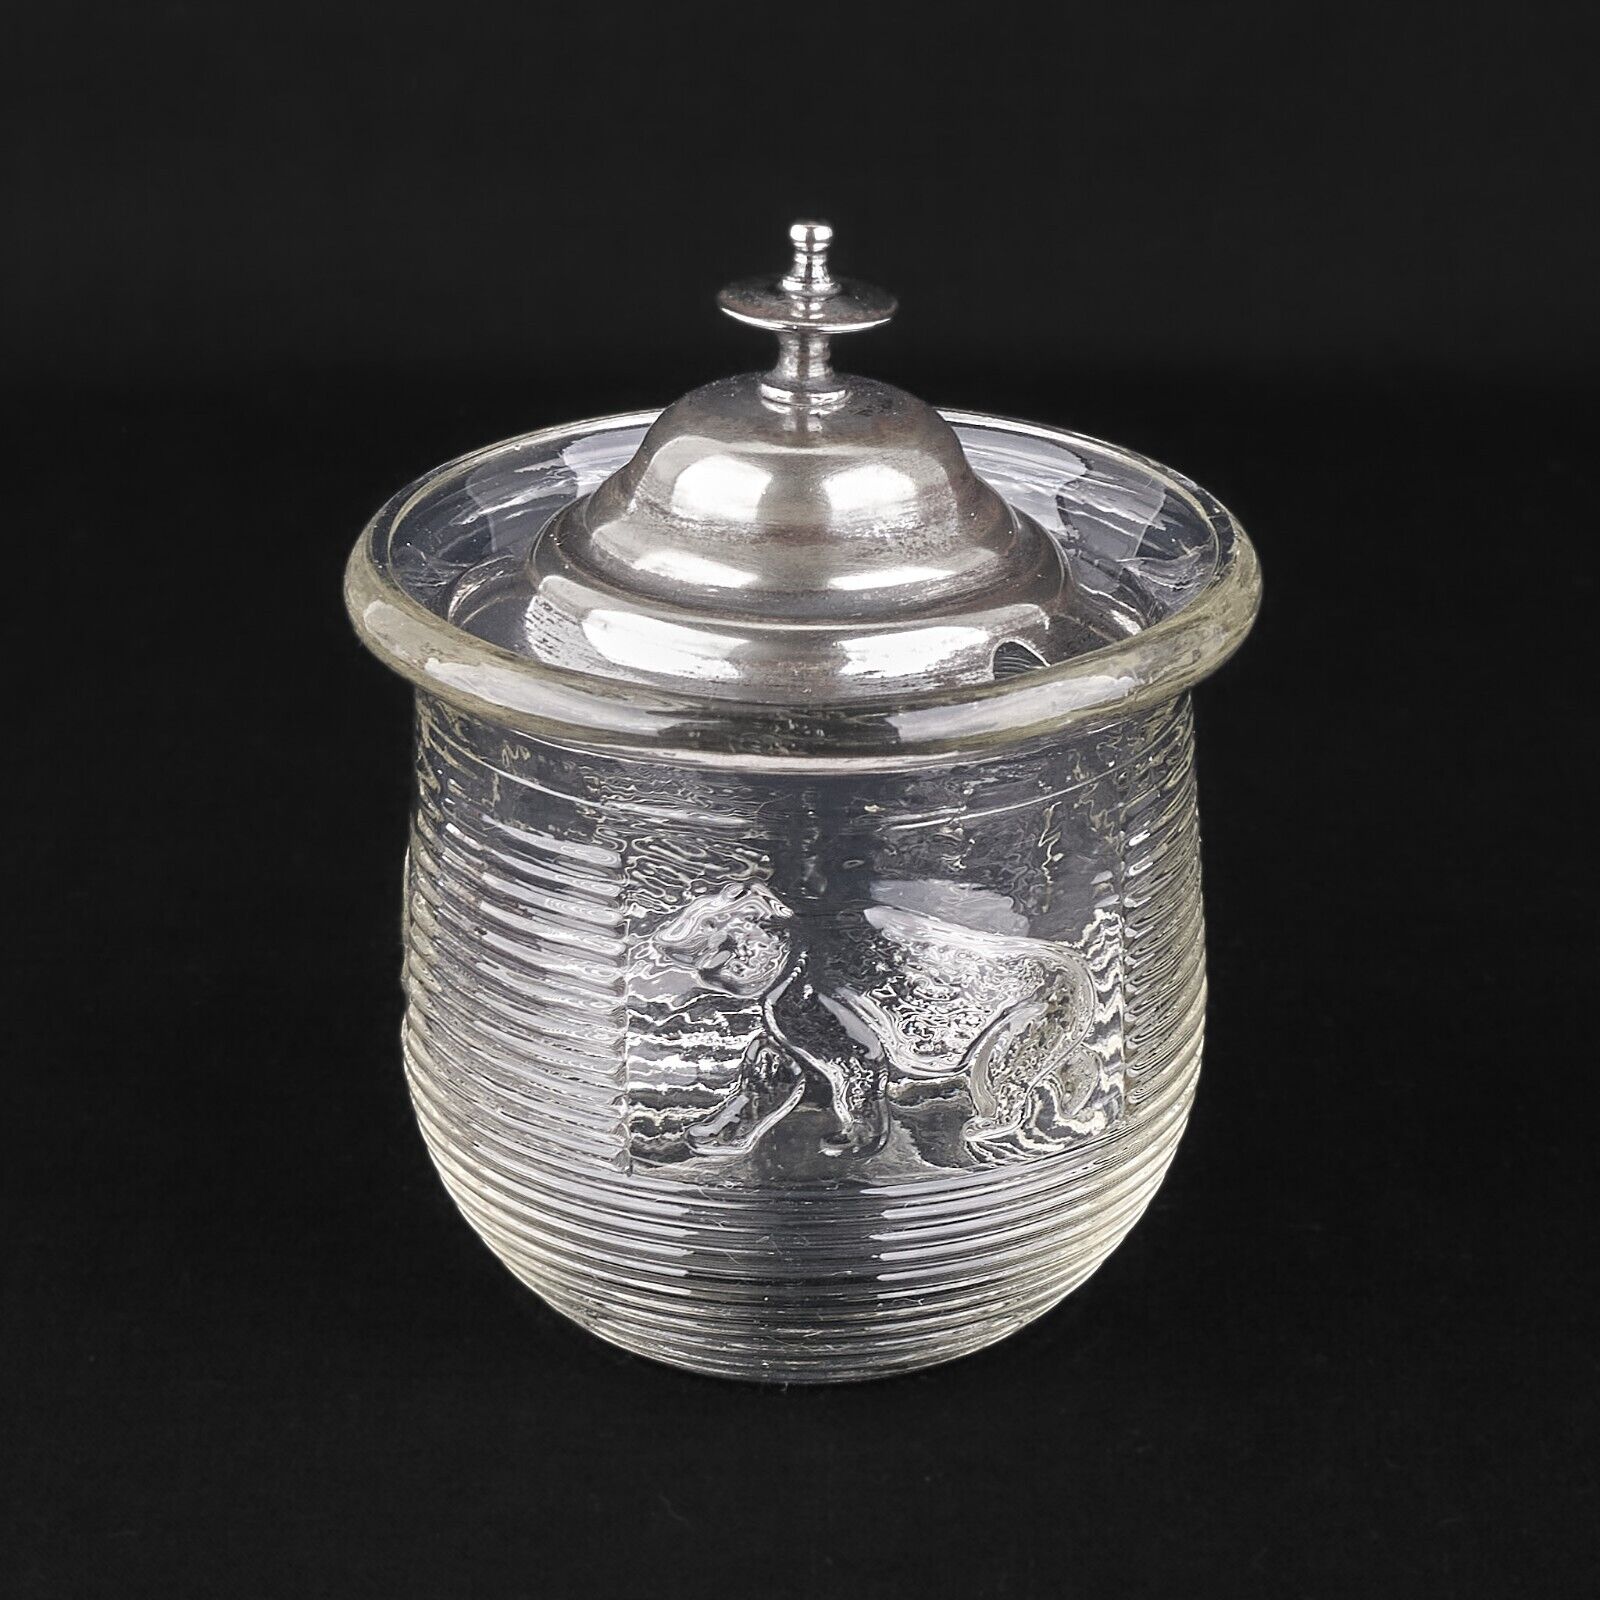 VINTAGE PRESSED GLASS THREE BEARS HONEY POT WITH A SILVER PLATED LID